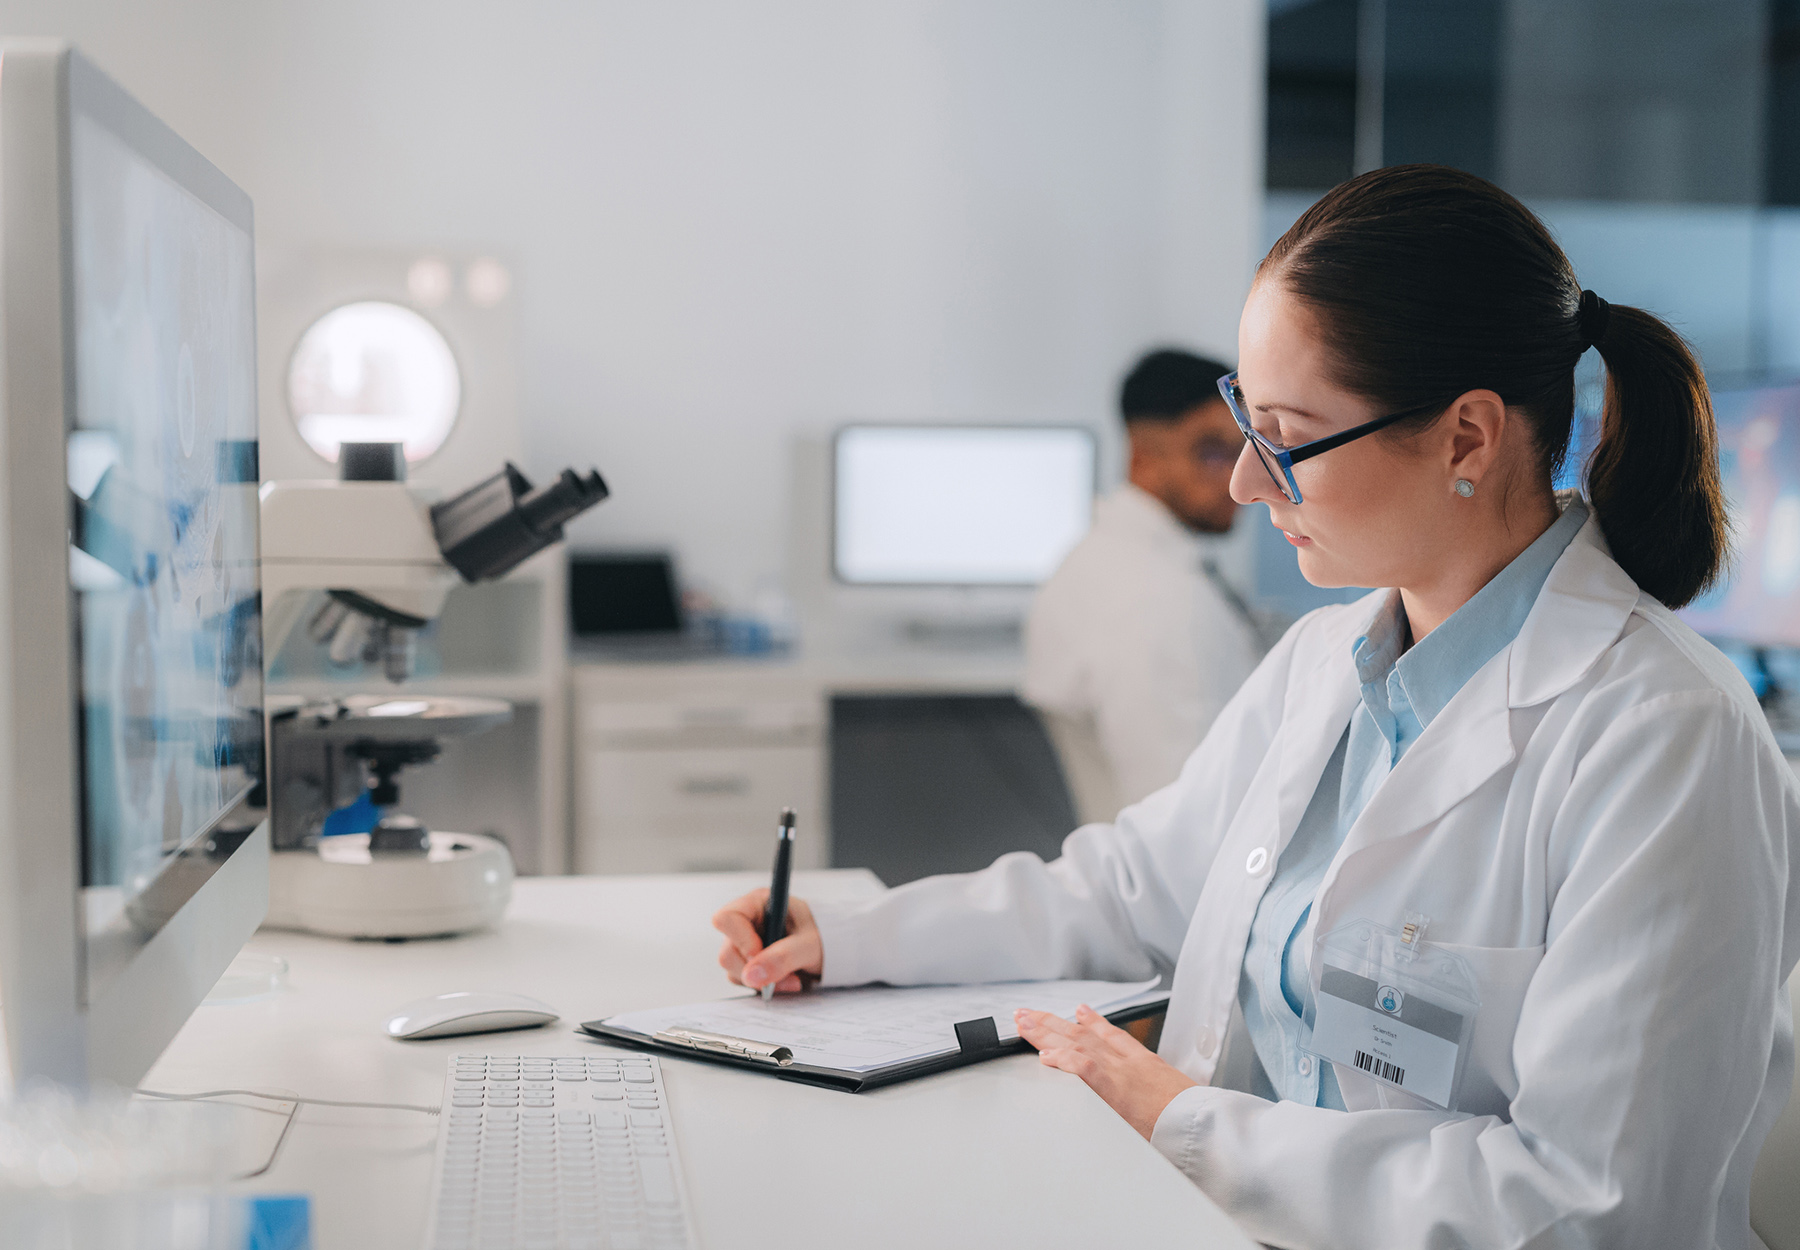 A female laboratory professional with glasses and a labcoat is sitting at a desk and writing notes on a clipboard. iStock image.